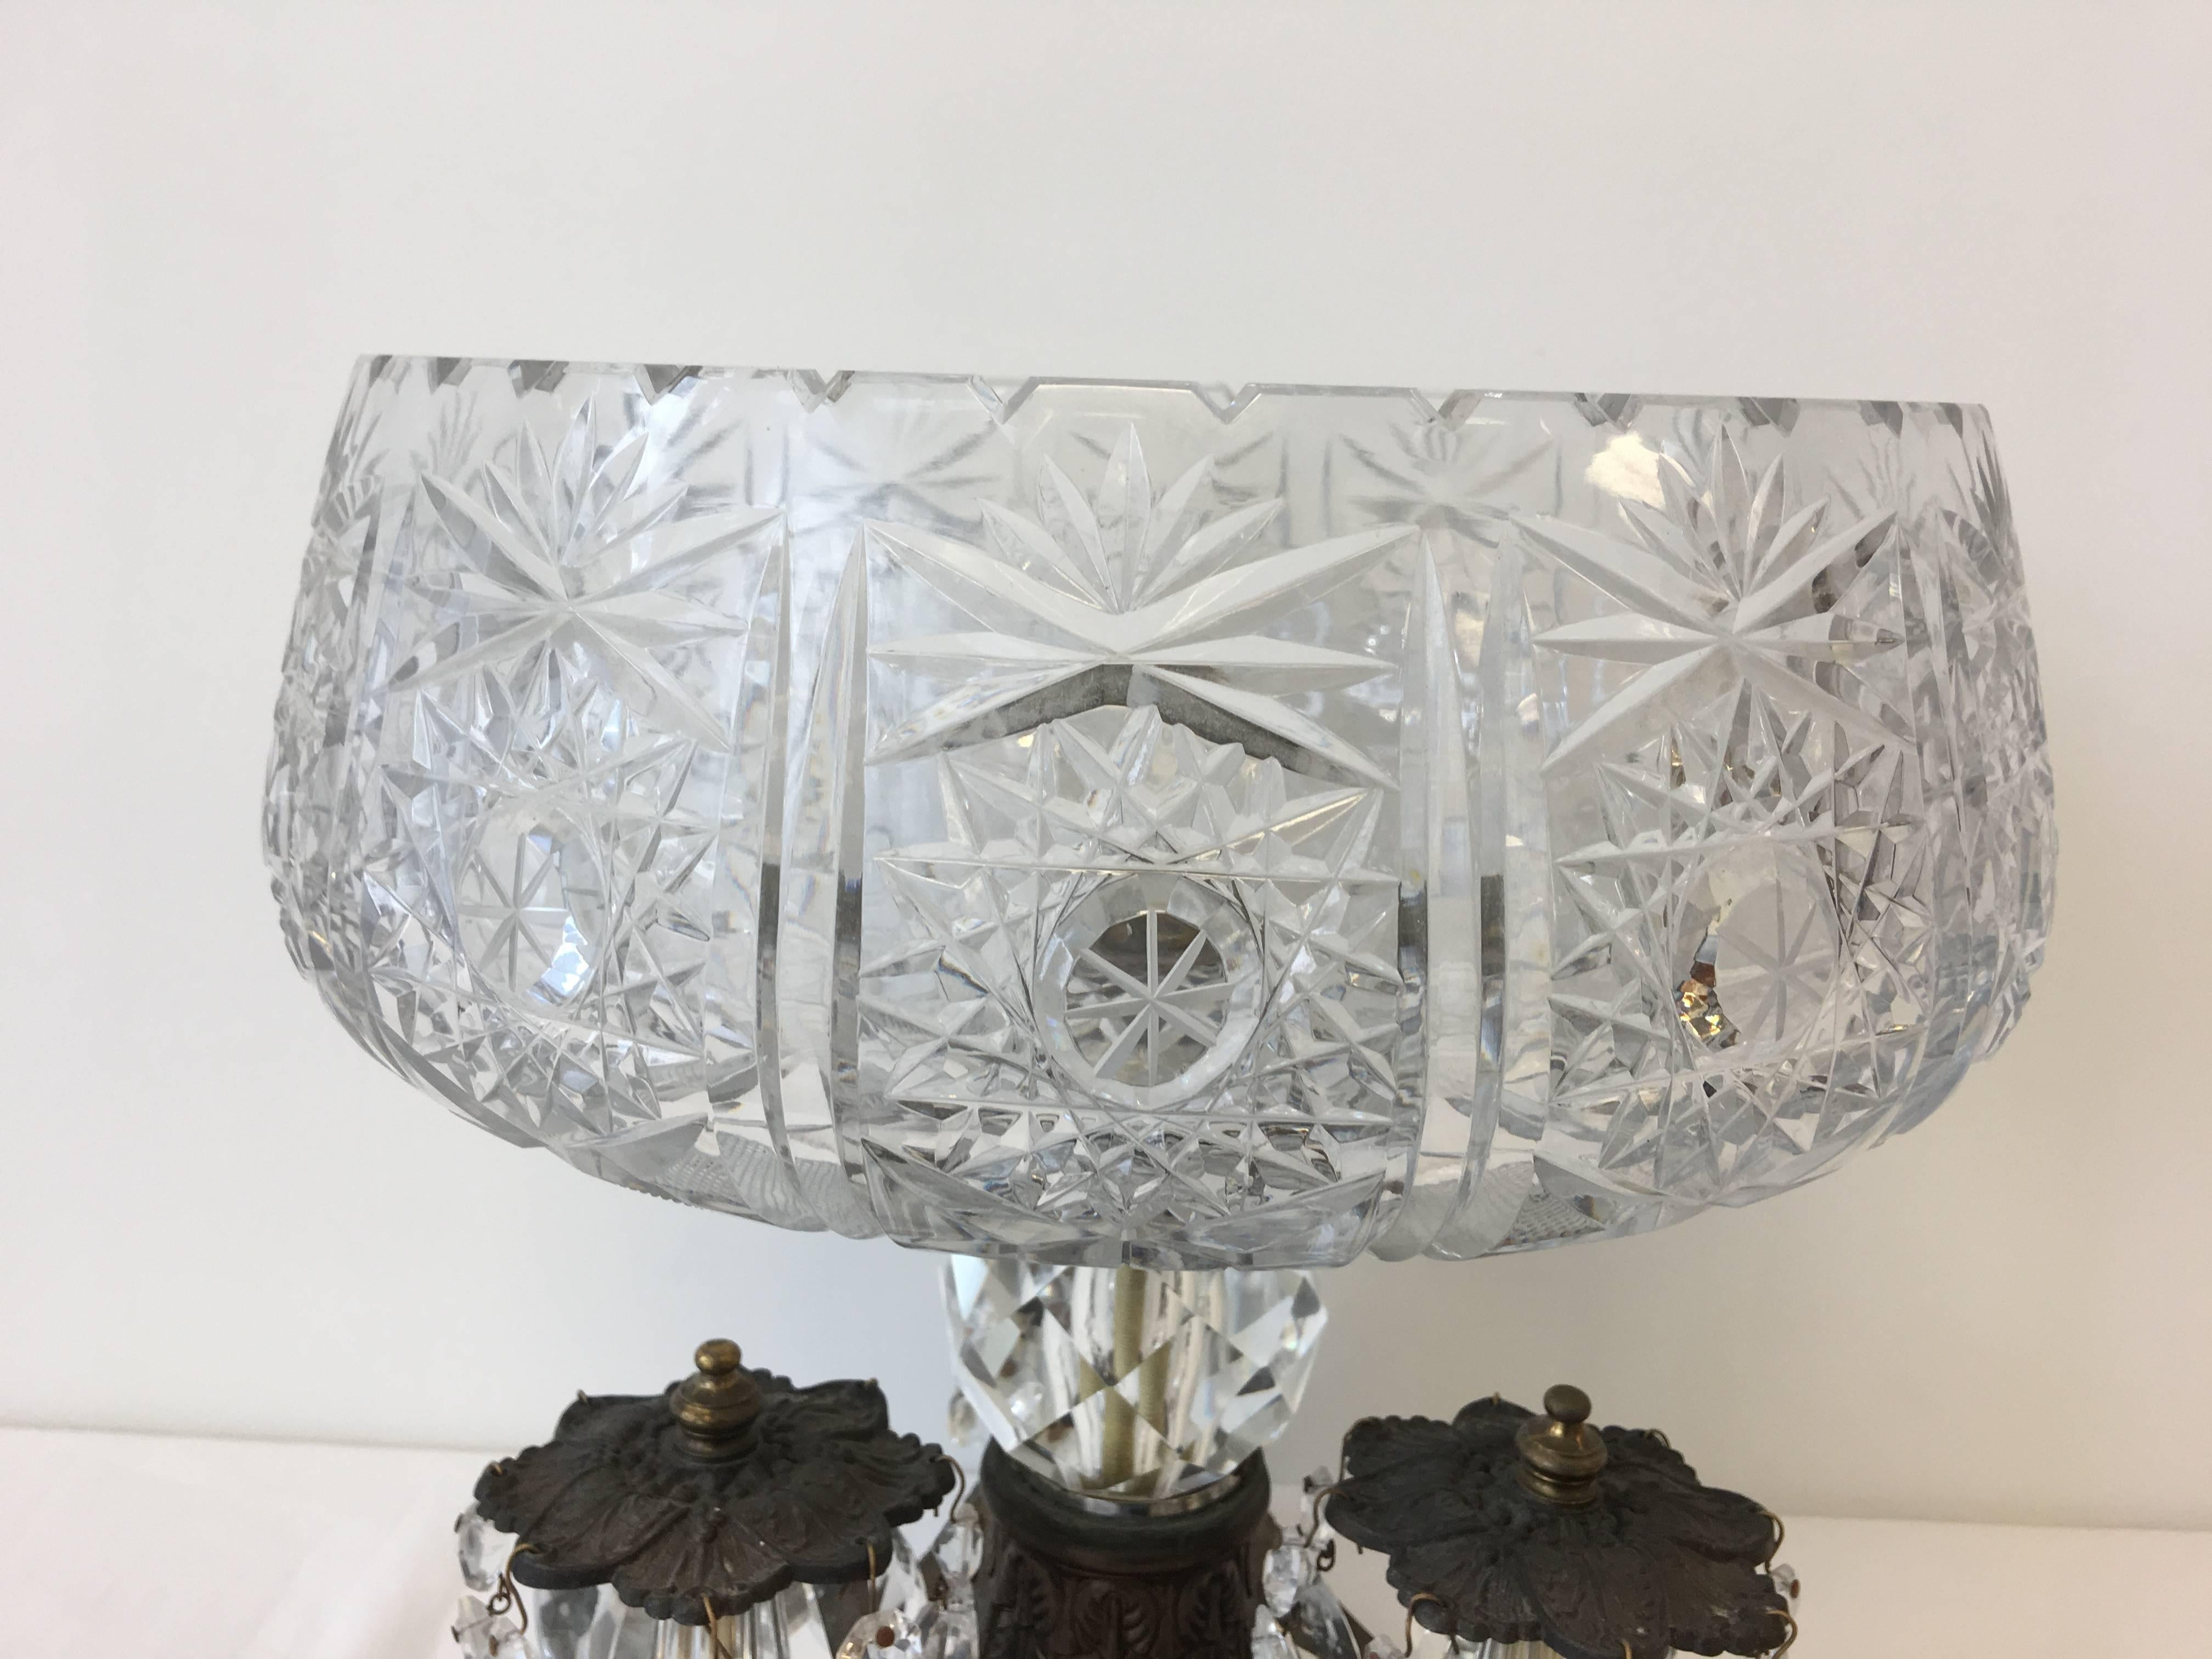 Offered is an exquisite, 19th century Art Nouveau, substantially large crystal and bronze compote bowl. A magnificent piece for a centerpiece, floral arrangement, etc.